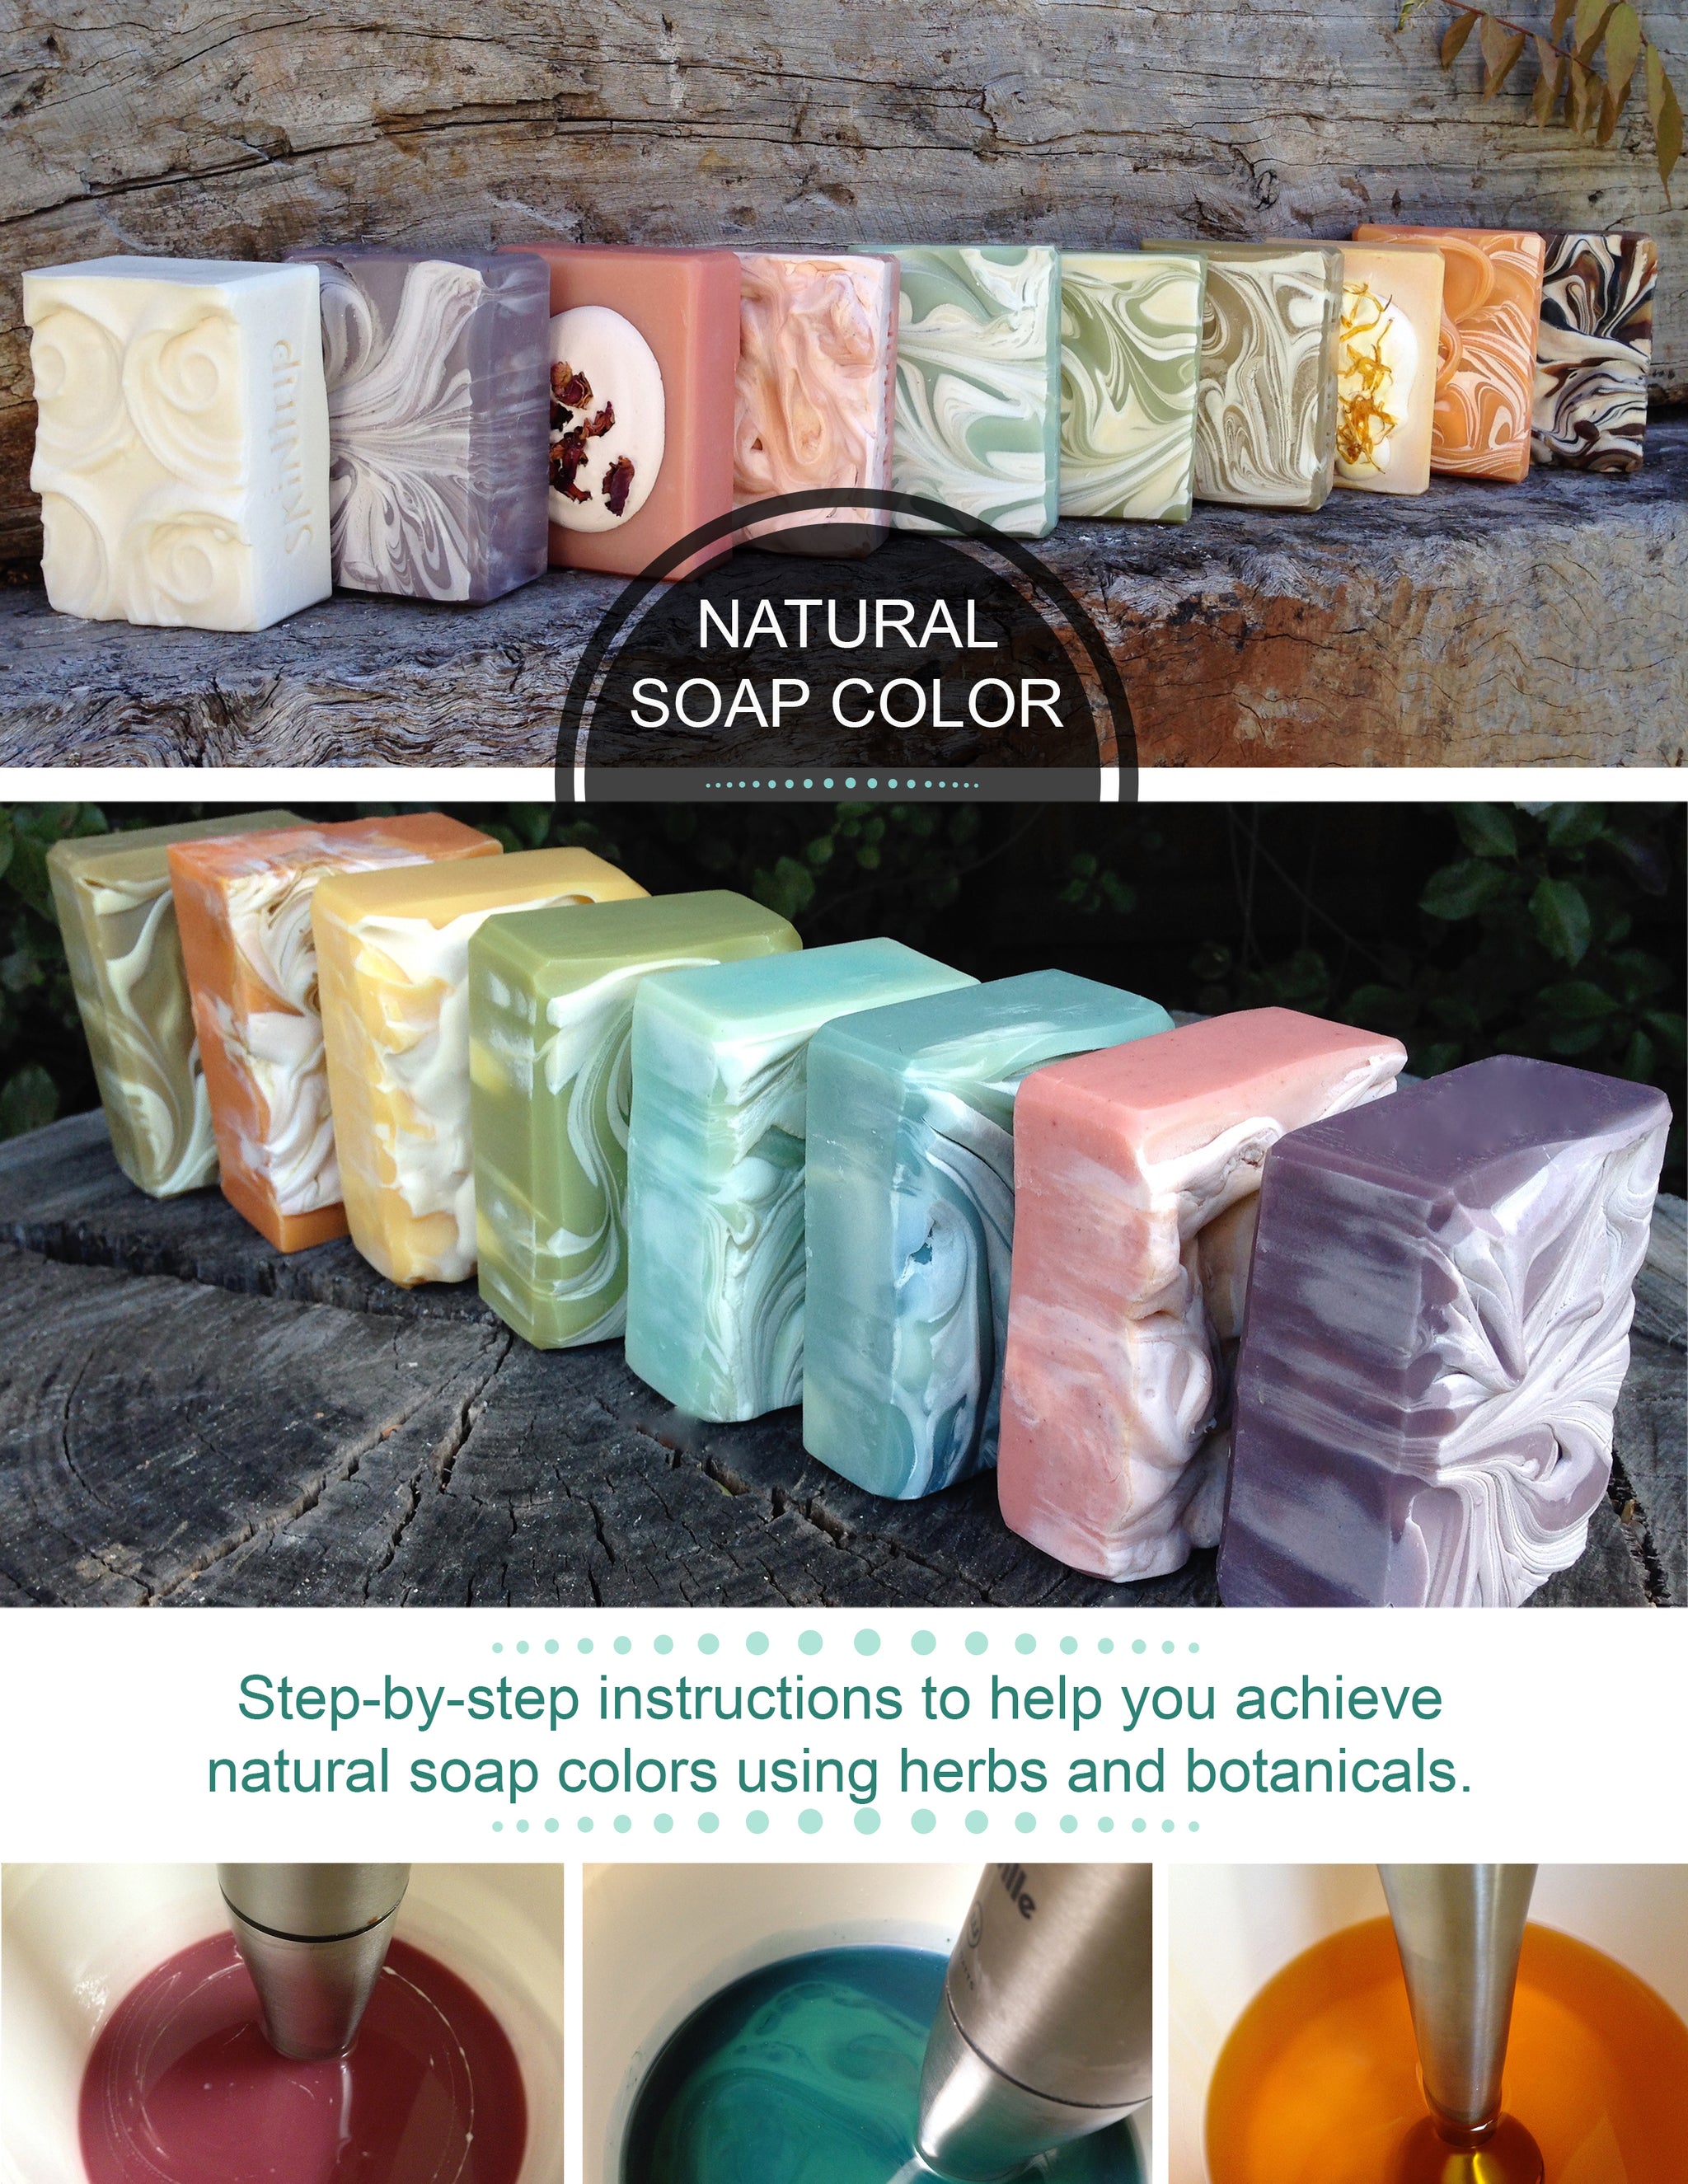 Natural Soap Color by Jo Haslauer - Ebooks, Books and Videos